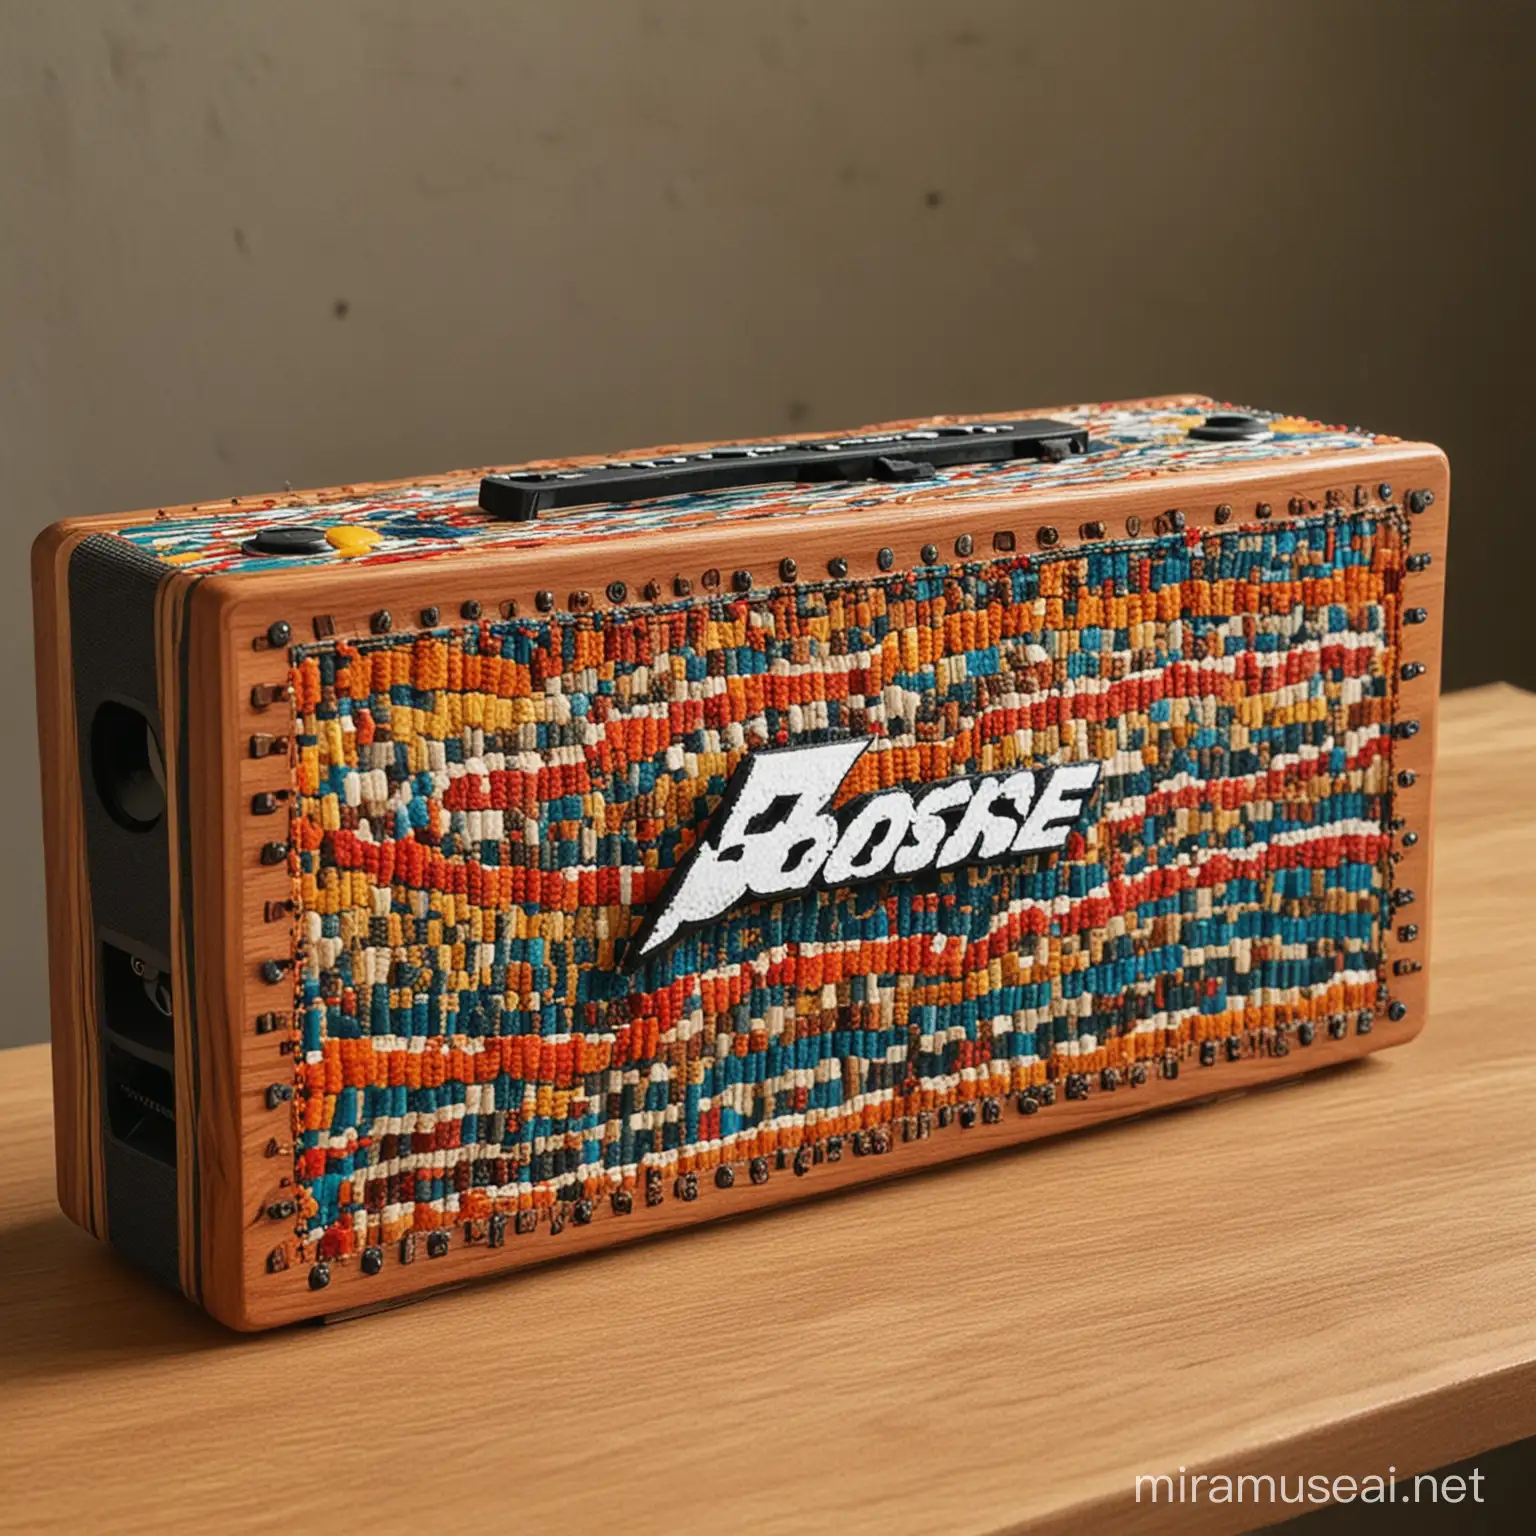 A Bose sound box customised with Bhaane's streatwear, Gen Z designs